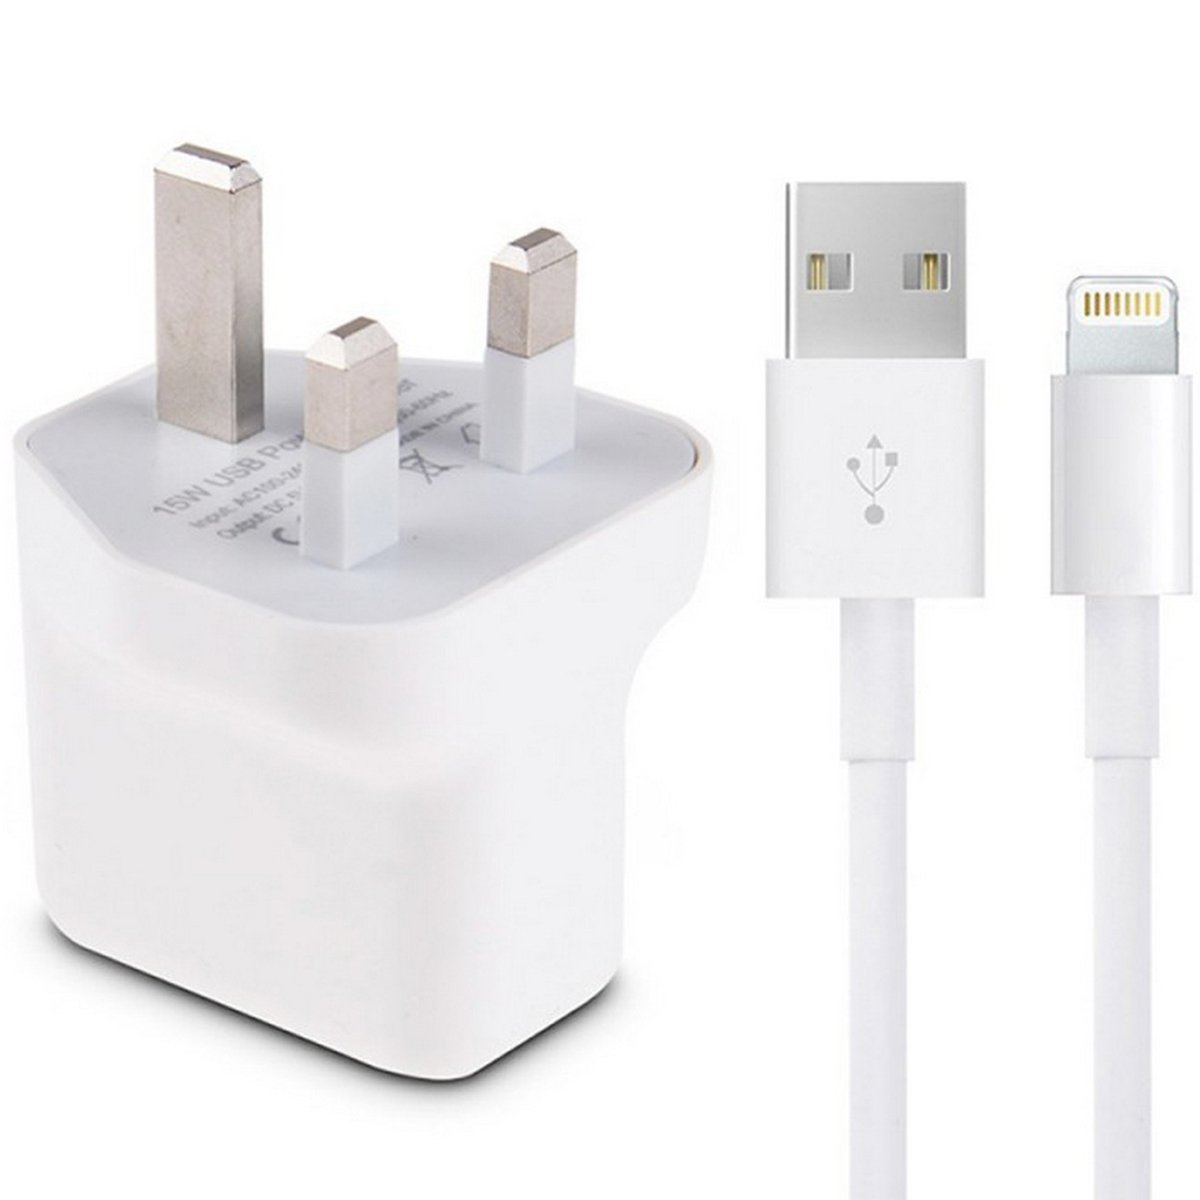 Trands Travel Charger For Iphone With Lightning Cable TRA537